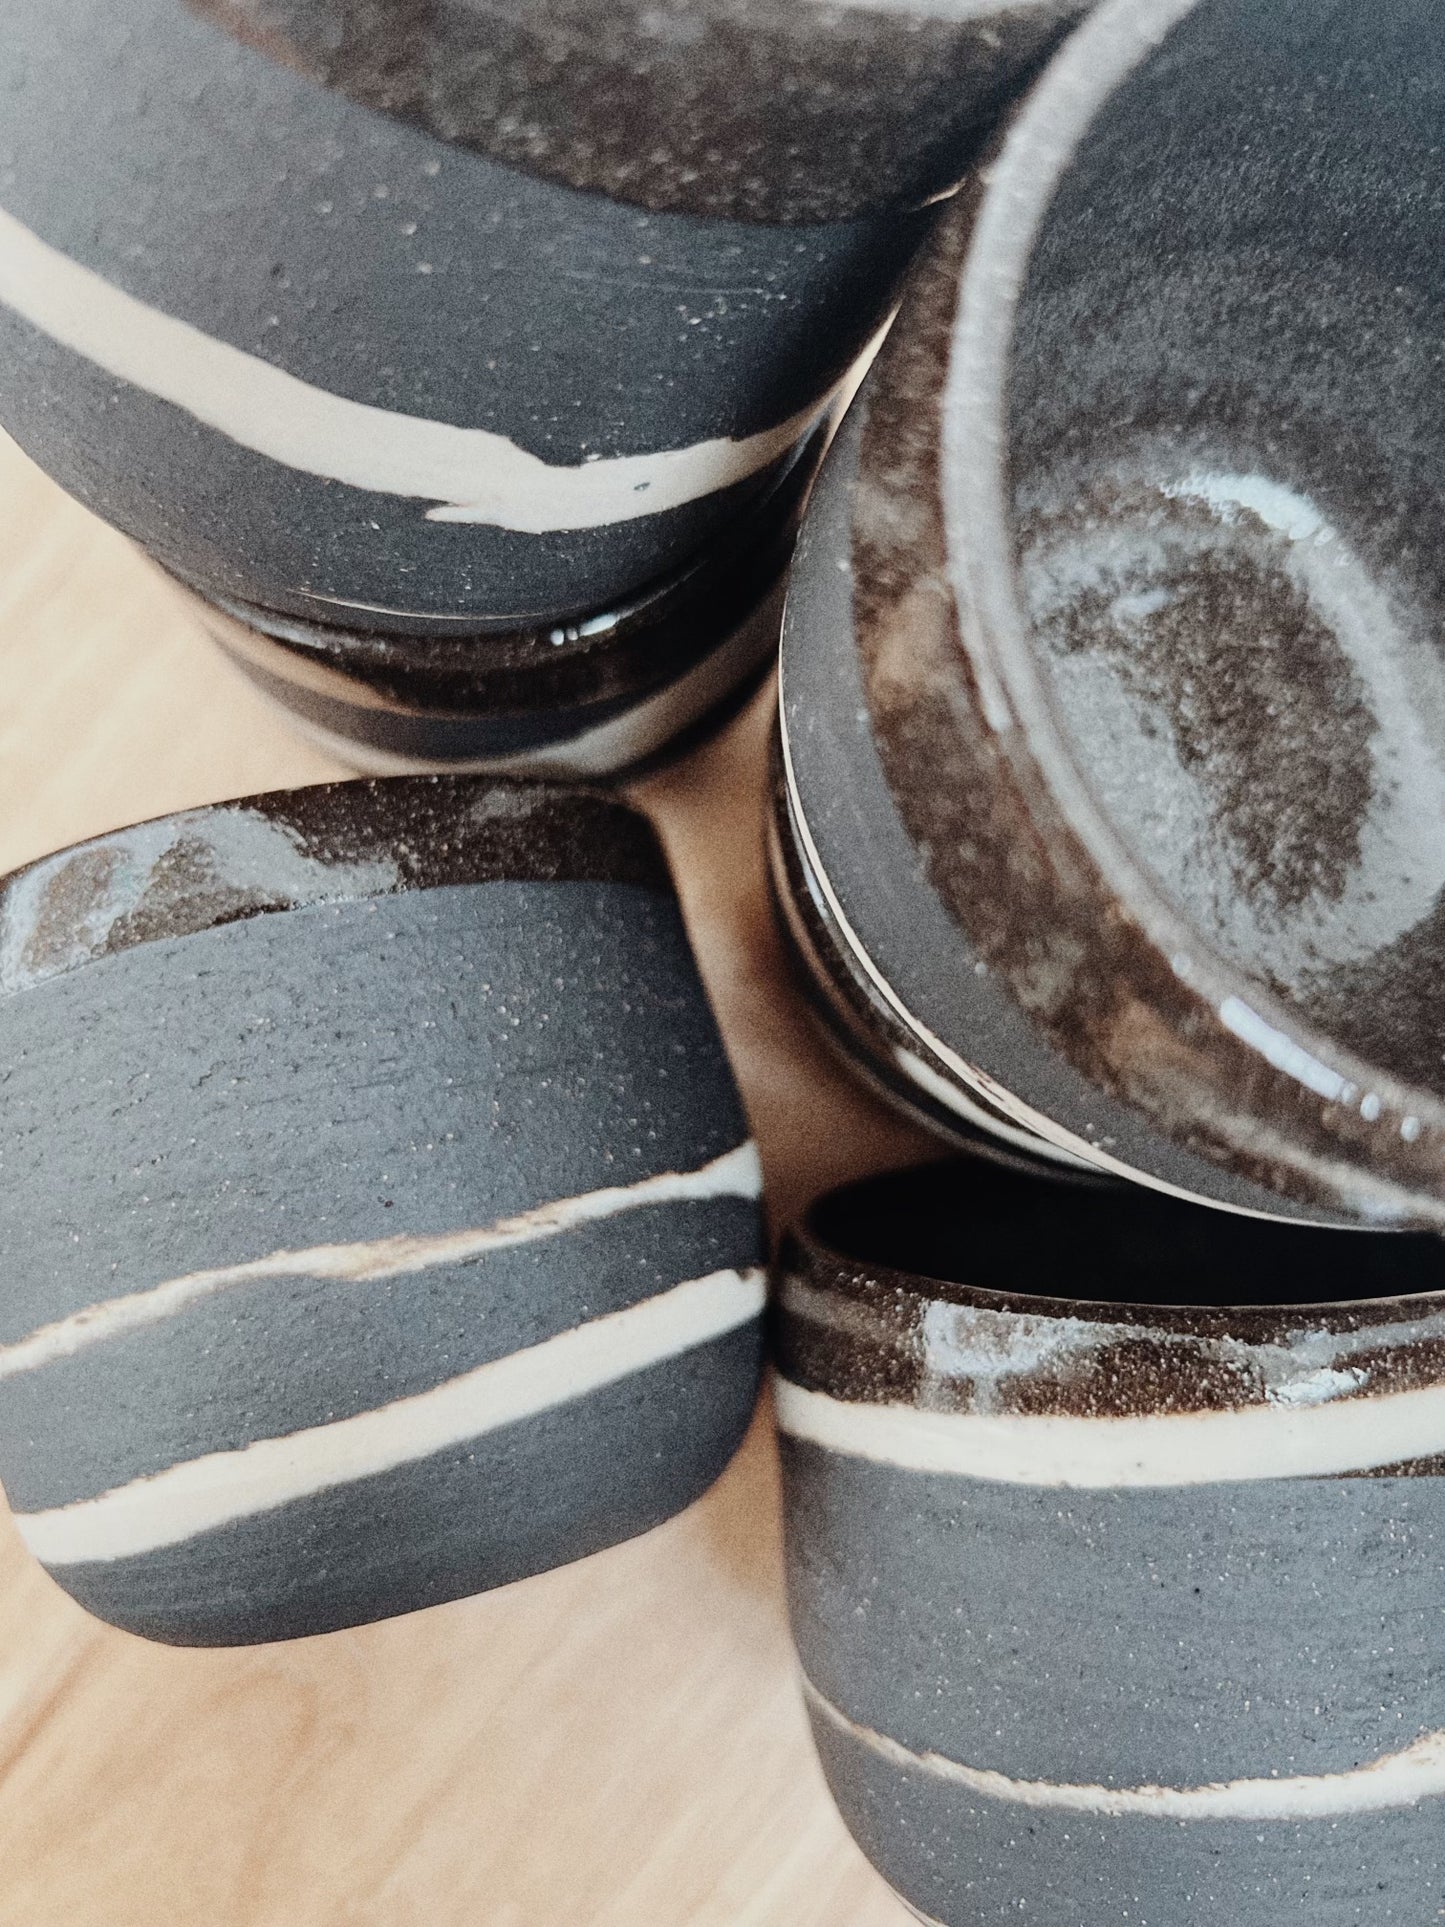 Black and White Swirl Cup